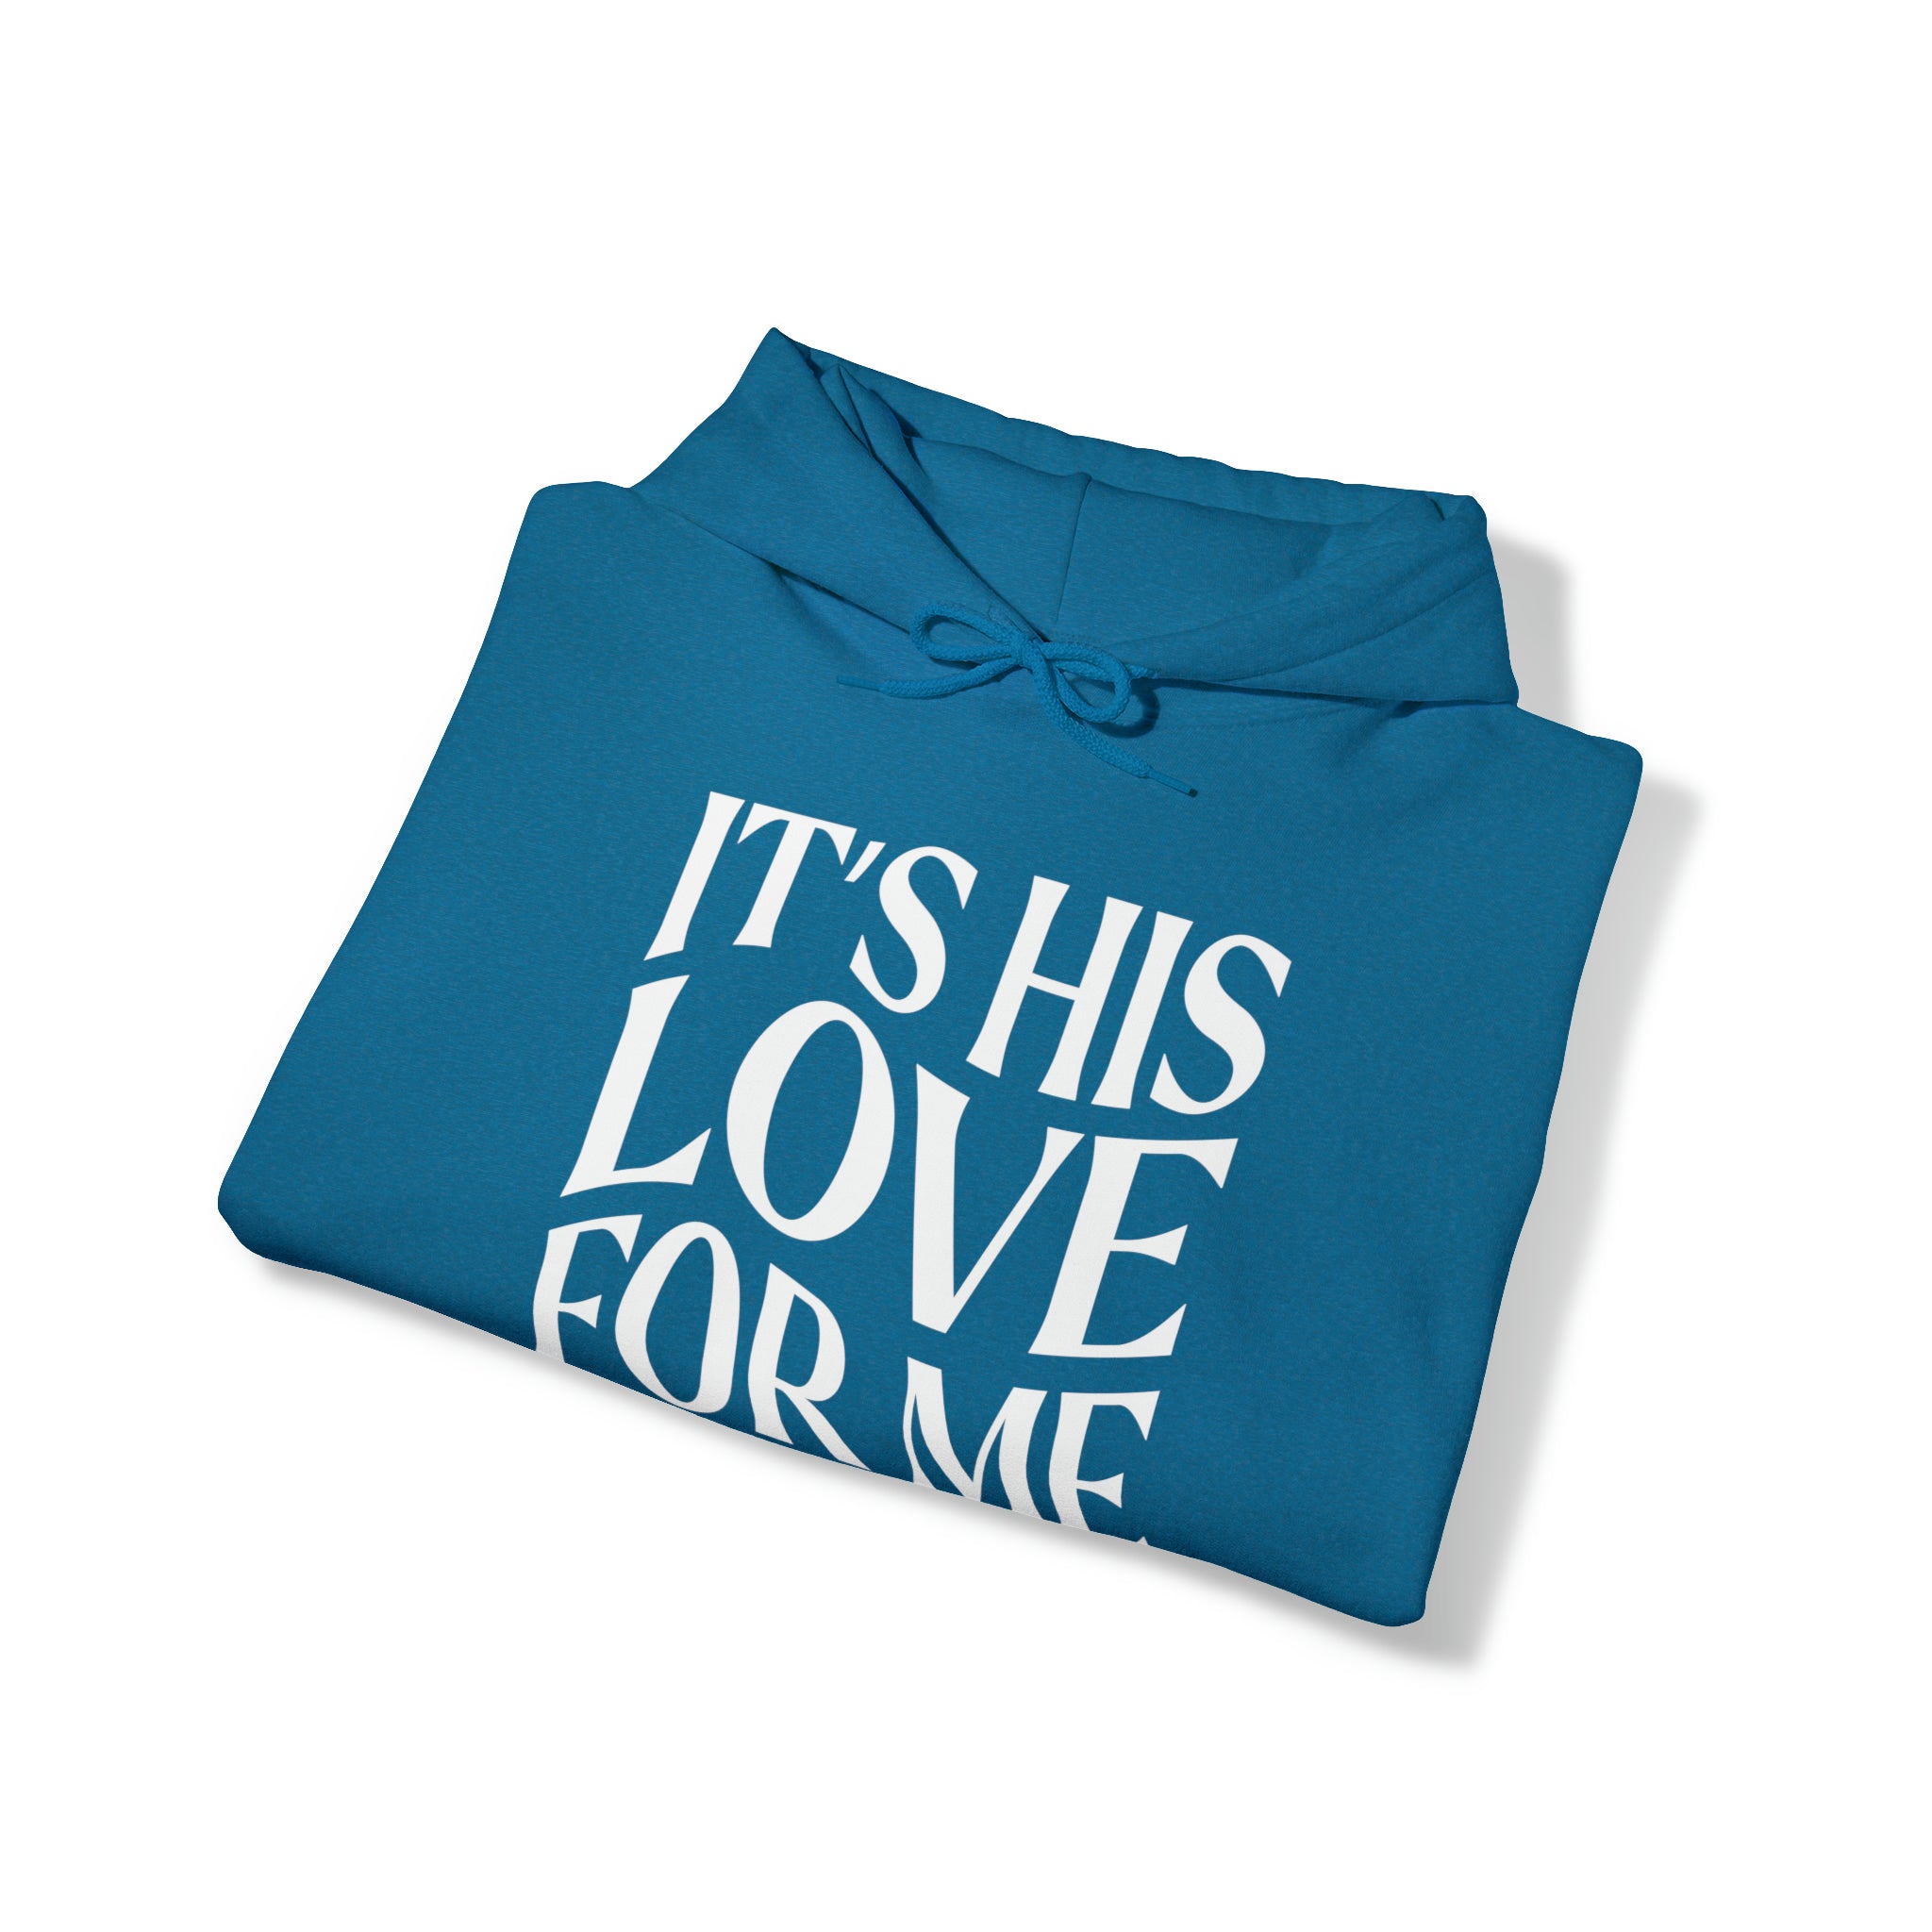 It's His Love For Me Hoodie